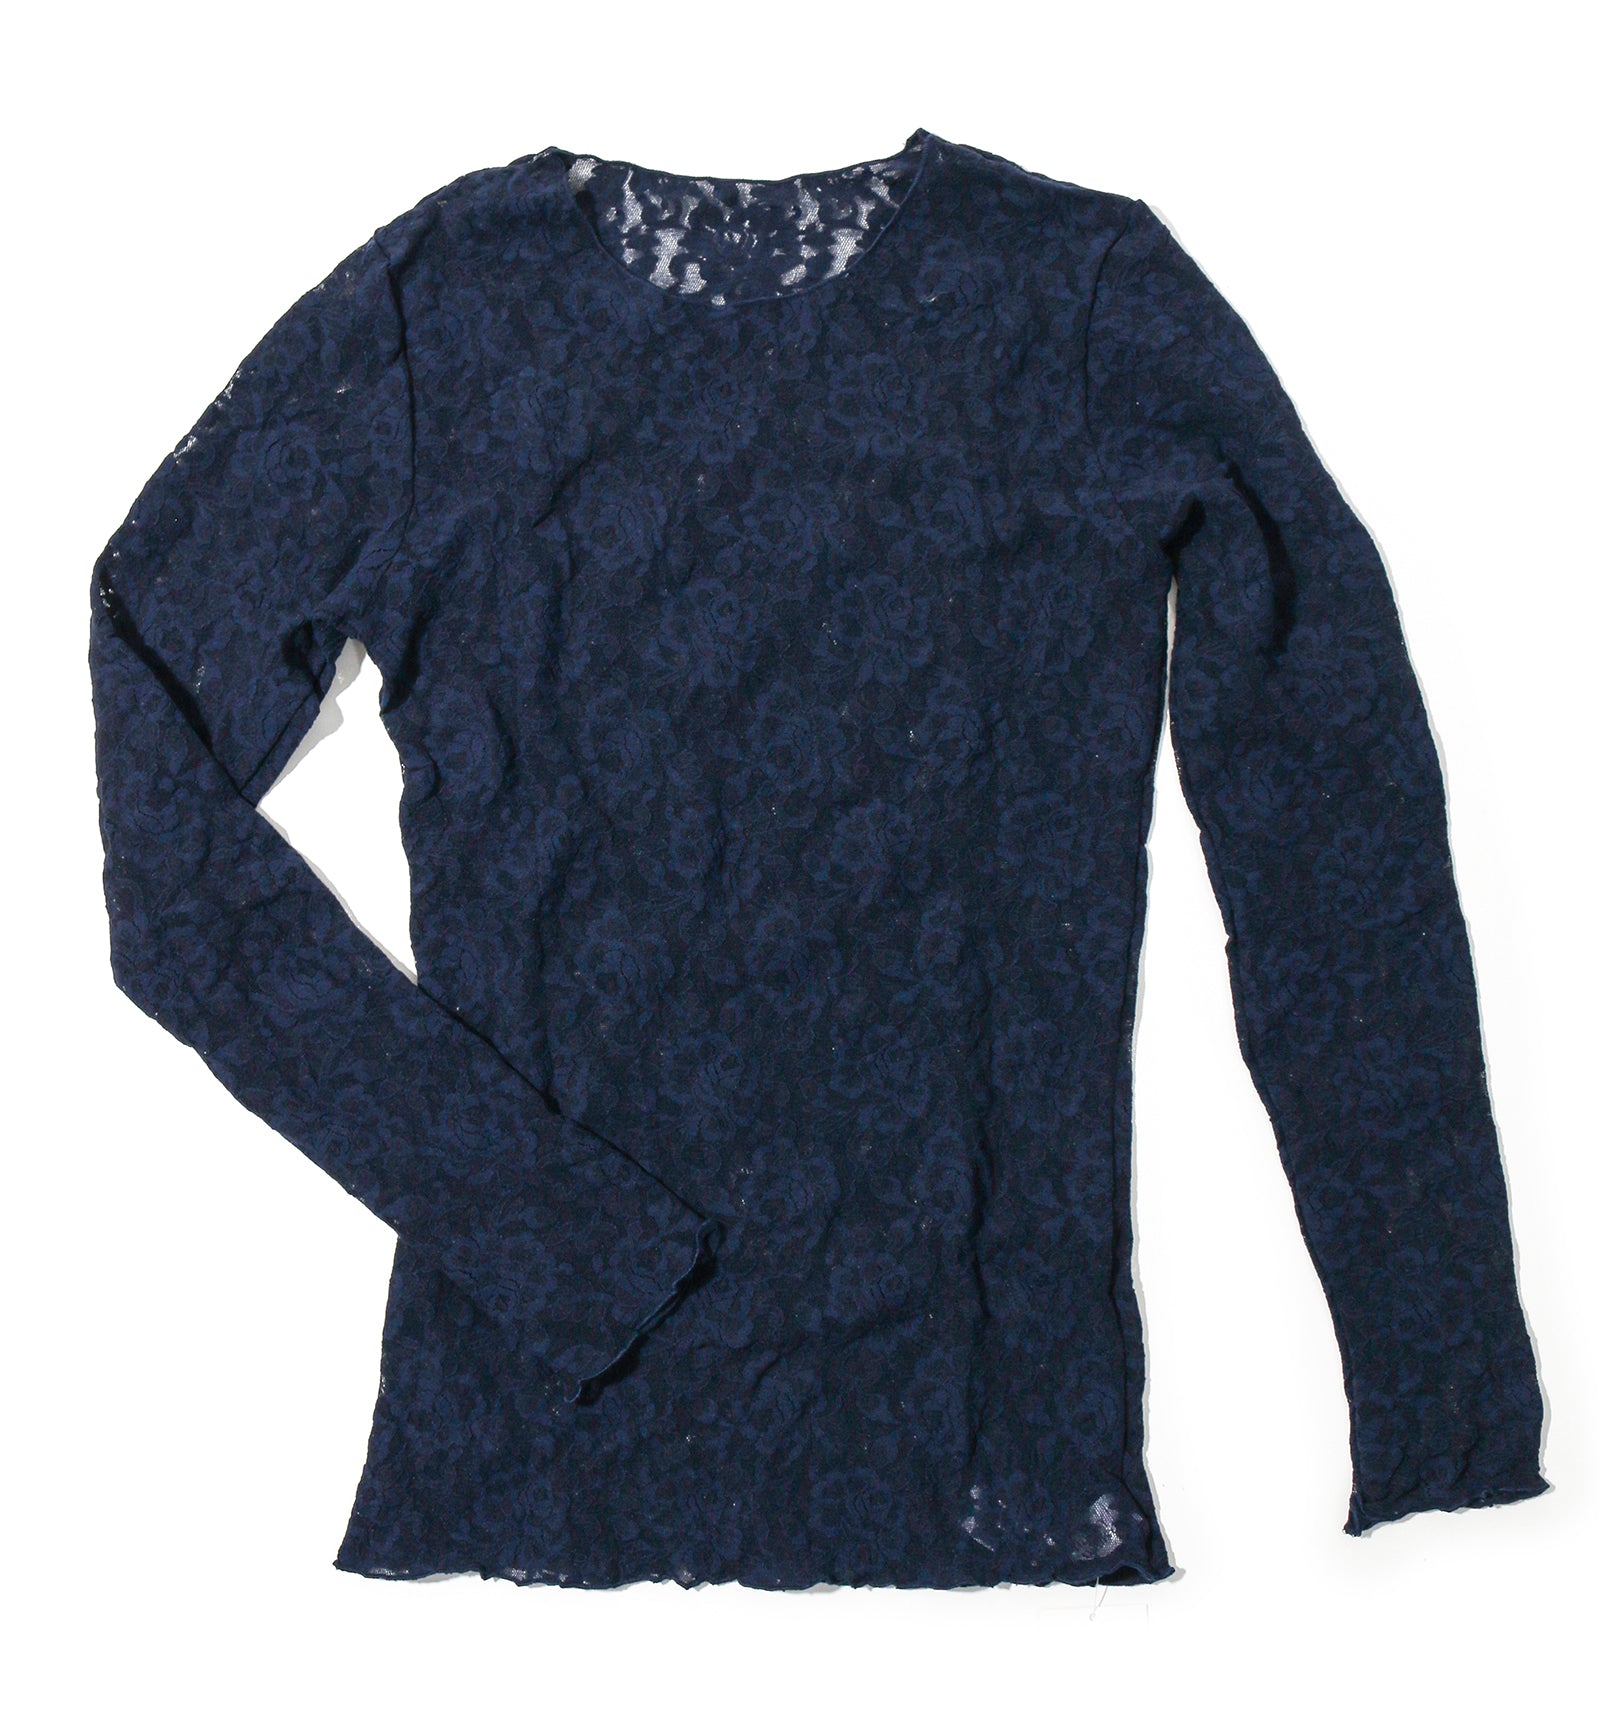 Hanky Panky Signature Lace Unlined Long Sleeve Top (128L),XS,Navy - Navy,XS